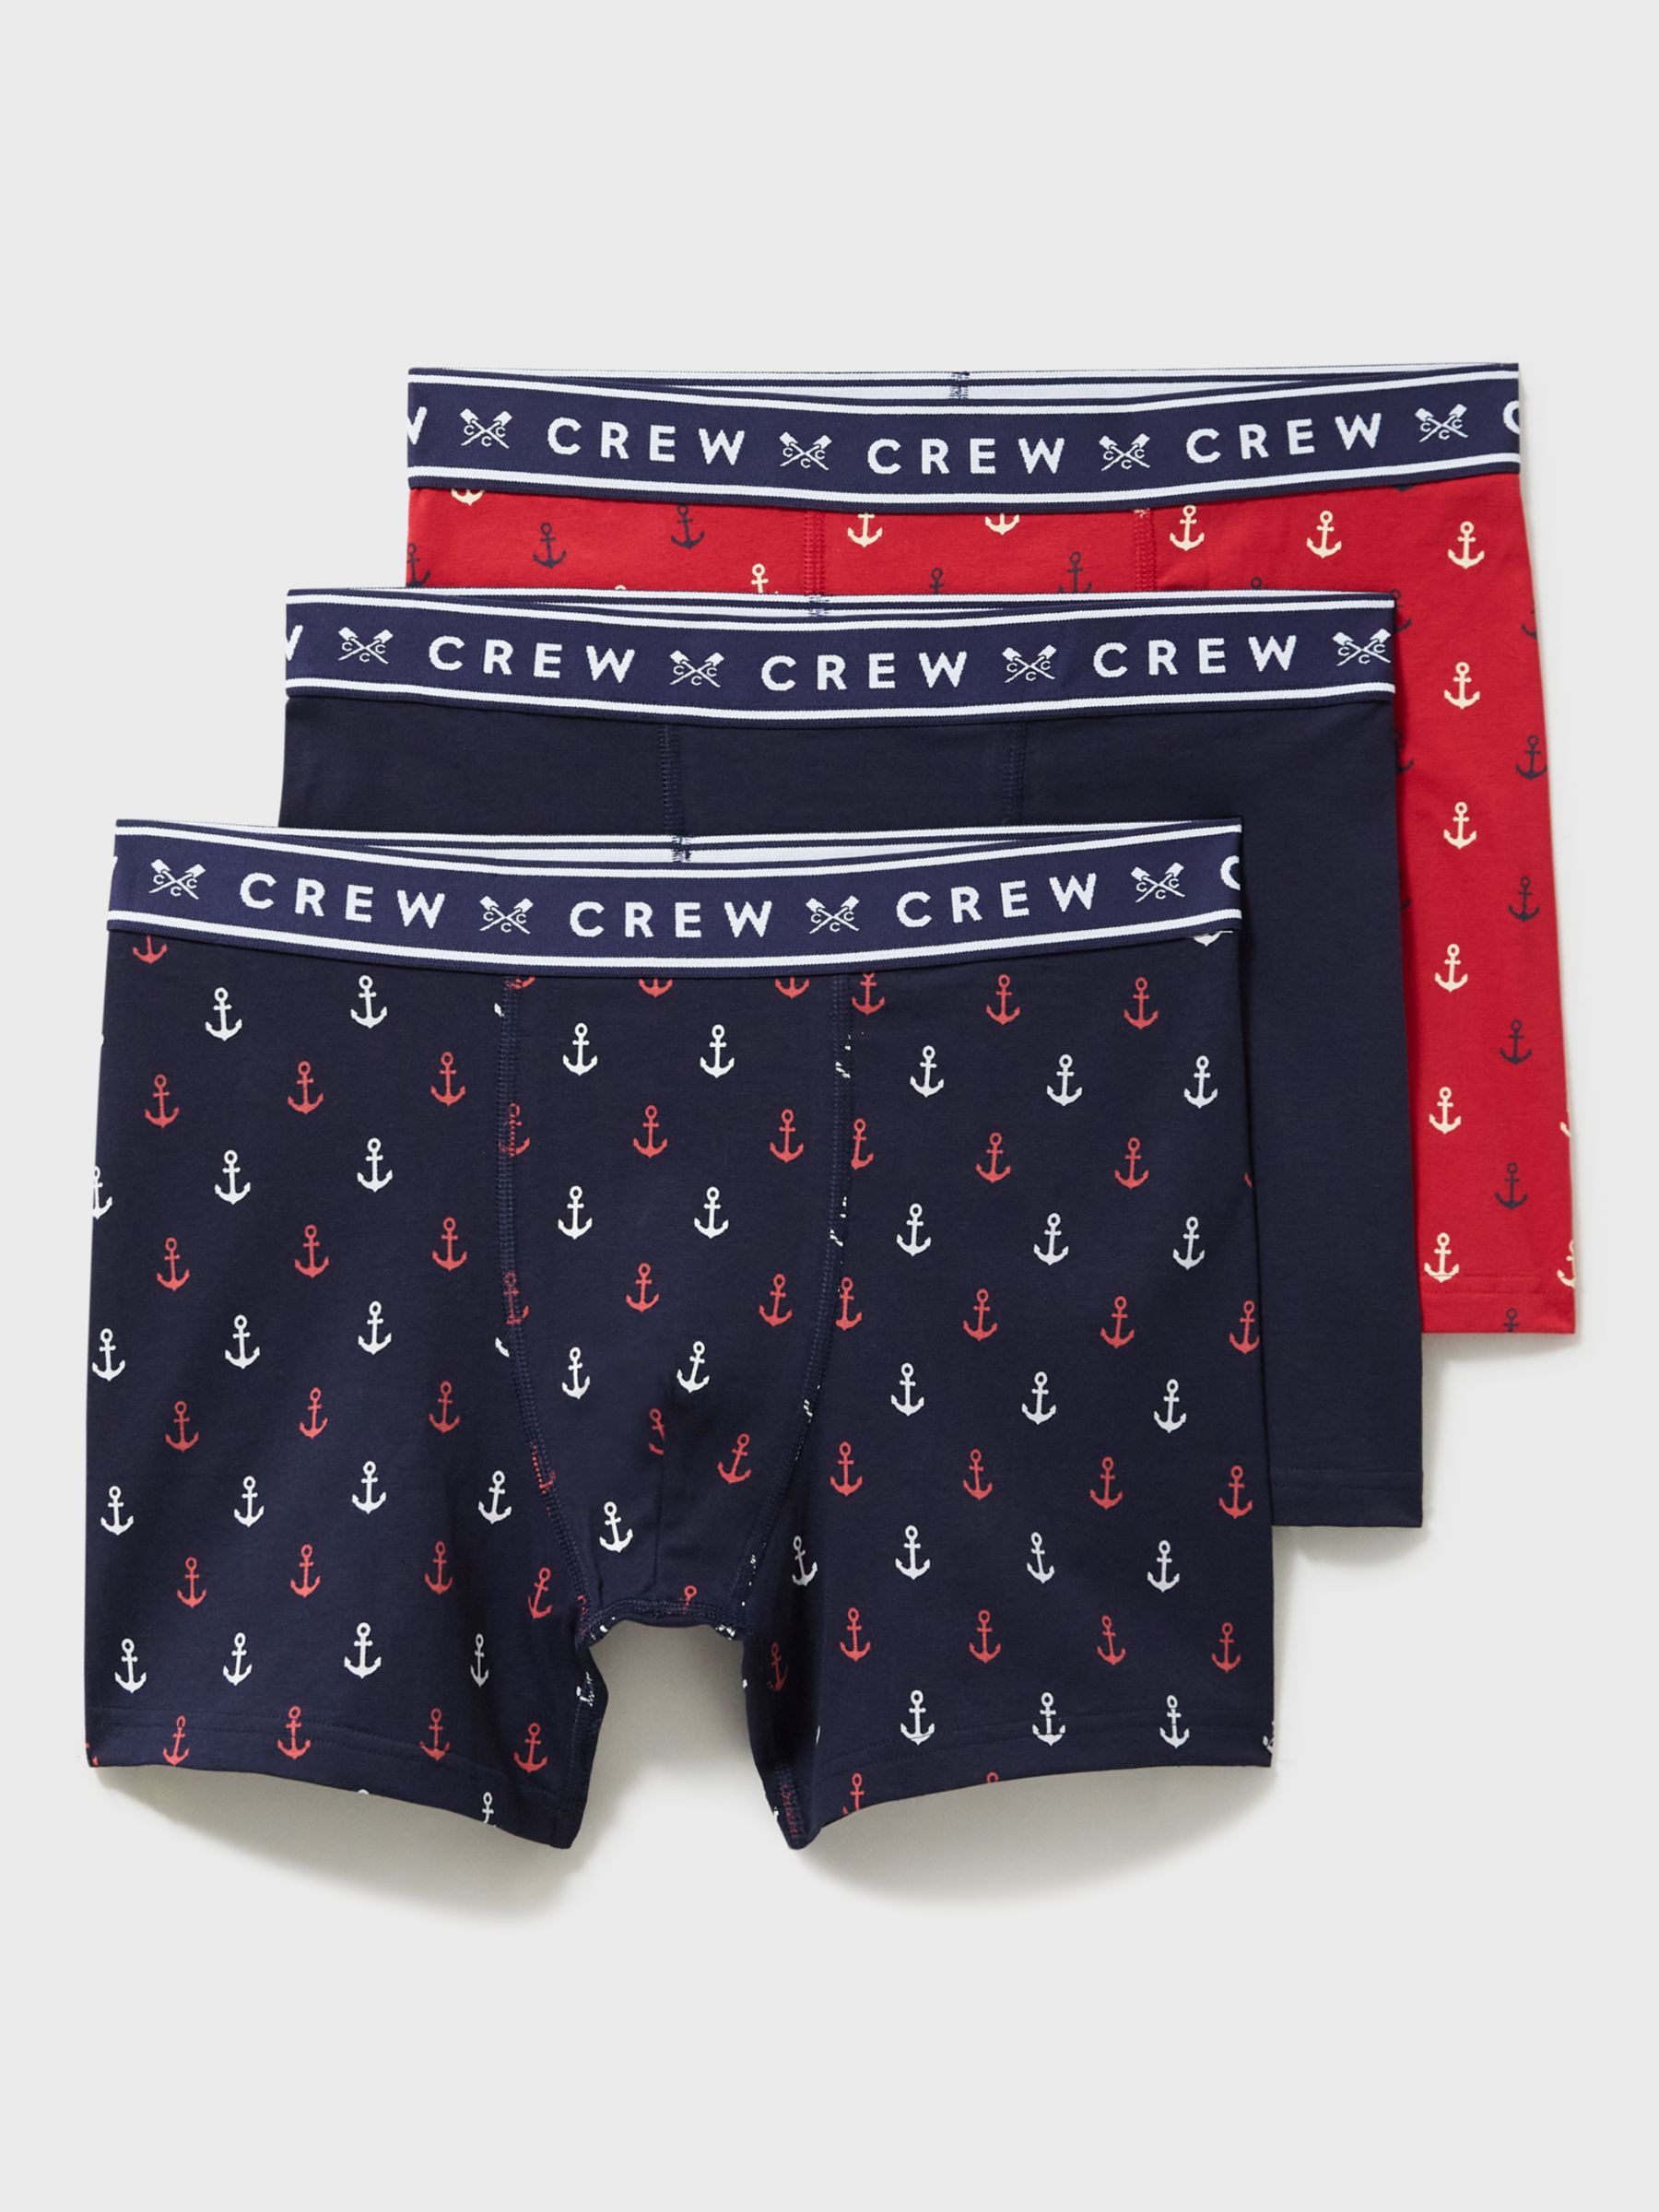 Buy Crew Clothing Anchor Print Jersey Boxers, Pack of 3, Red/Navy Online at johnlewis.com